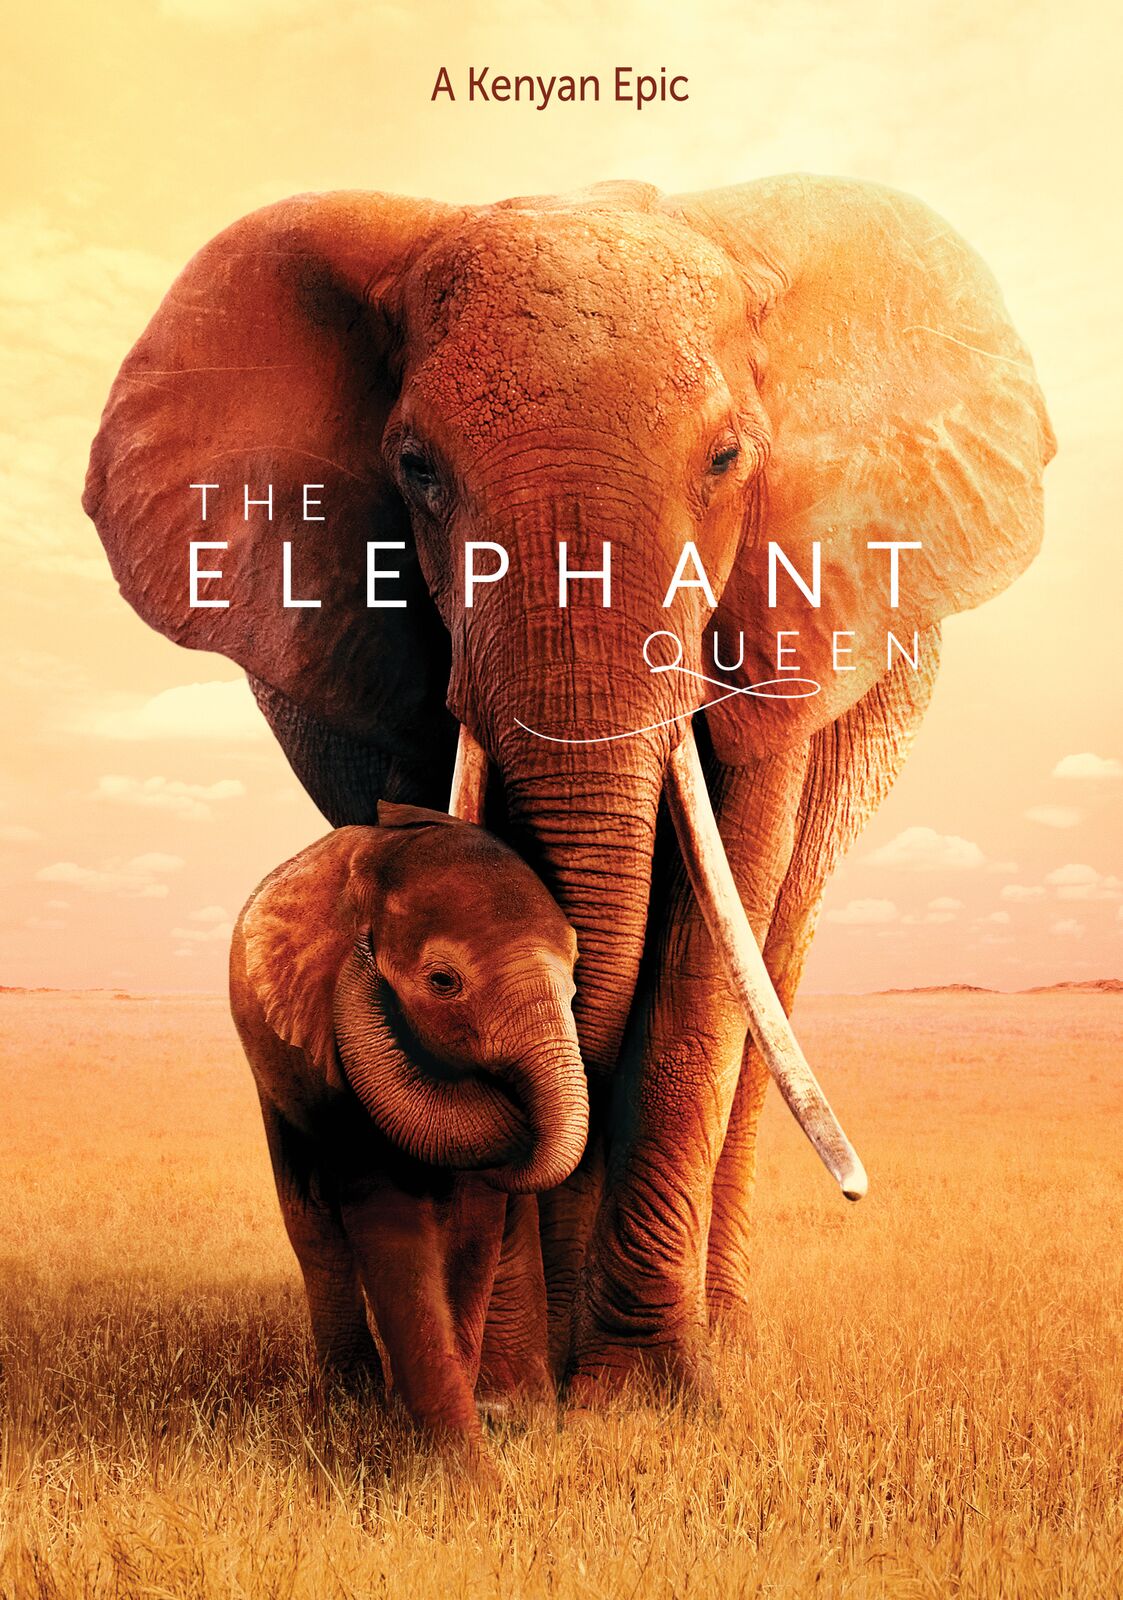 Details: ‘The Elephant Queen’ film to screen on Citizen TV this Easter Sunday